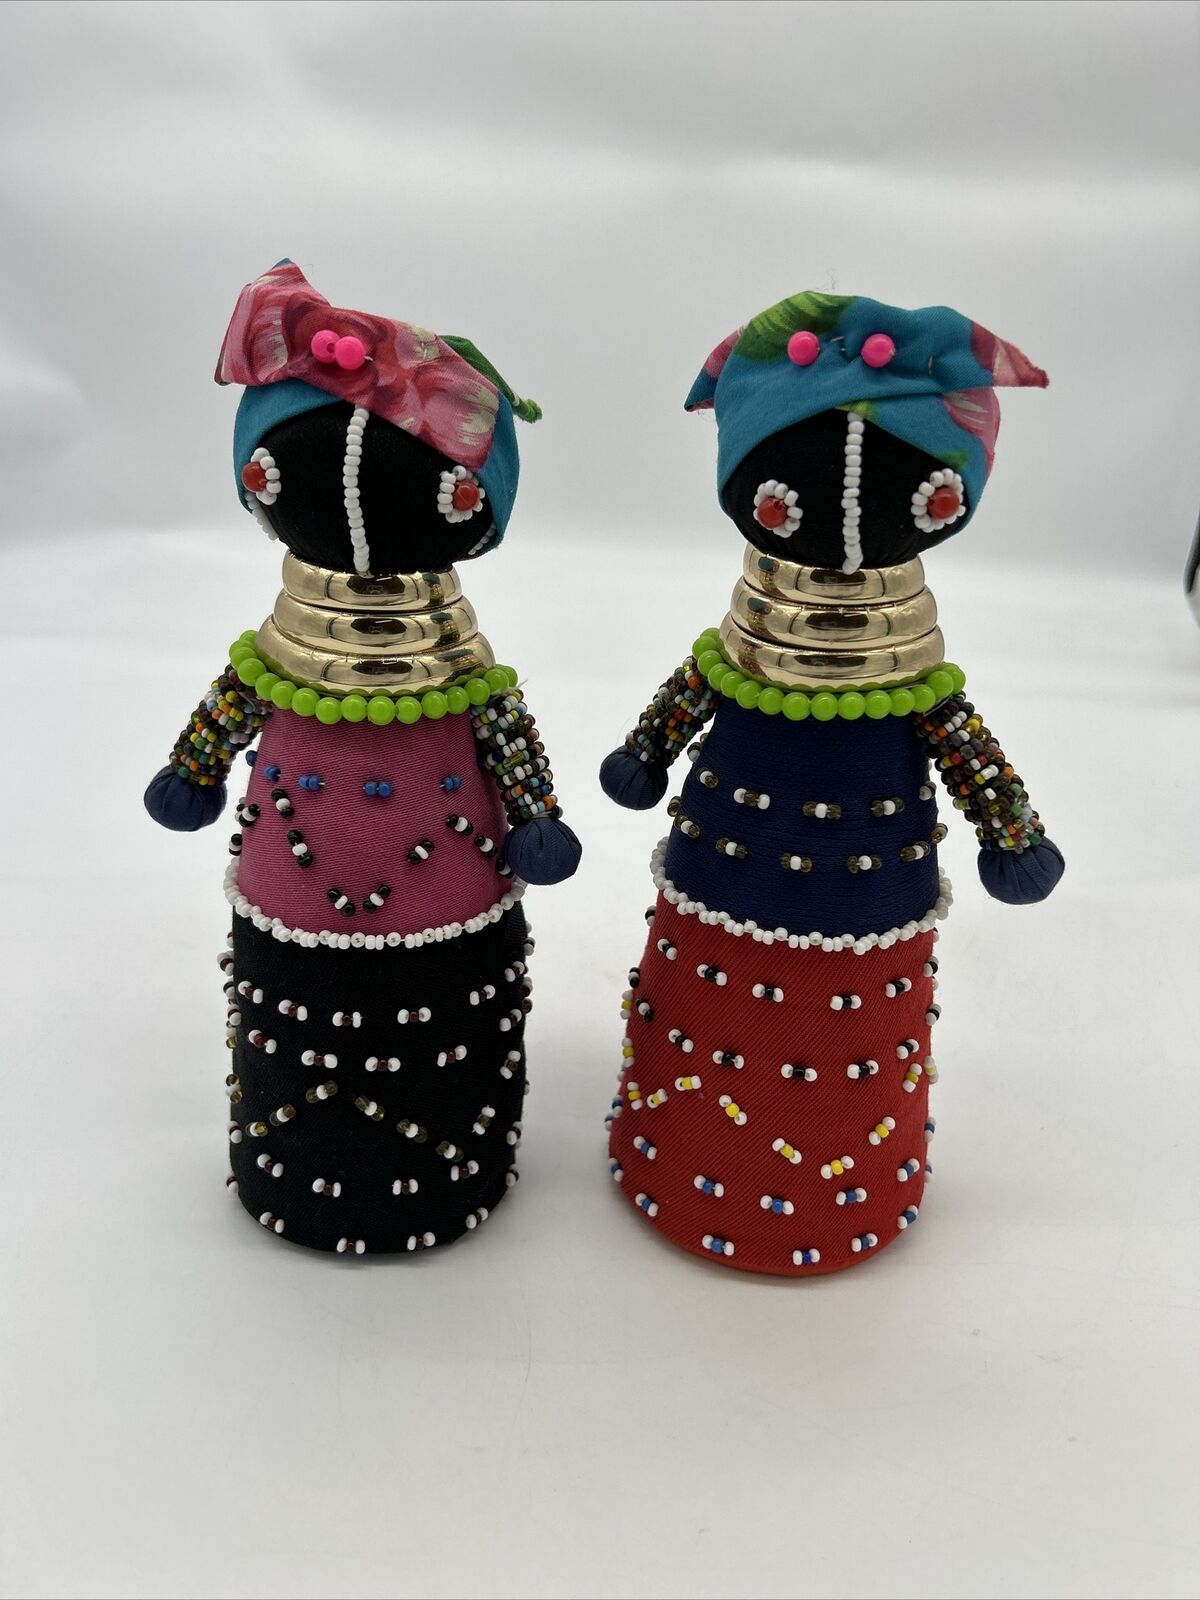 Vintage Ndebele Handmade South African Colorful Beaded Ceremonial Dolls (2) 8.5”